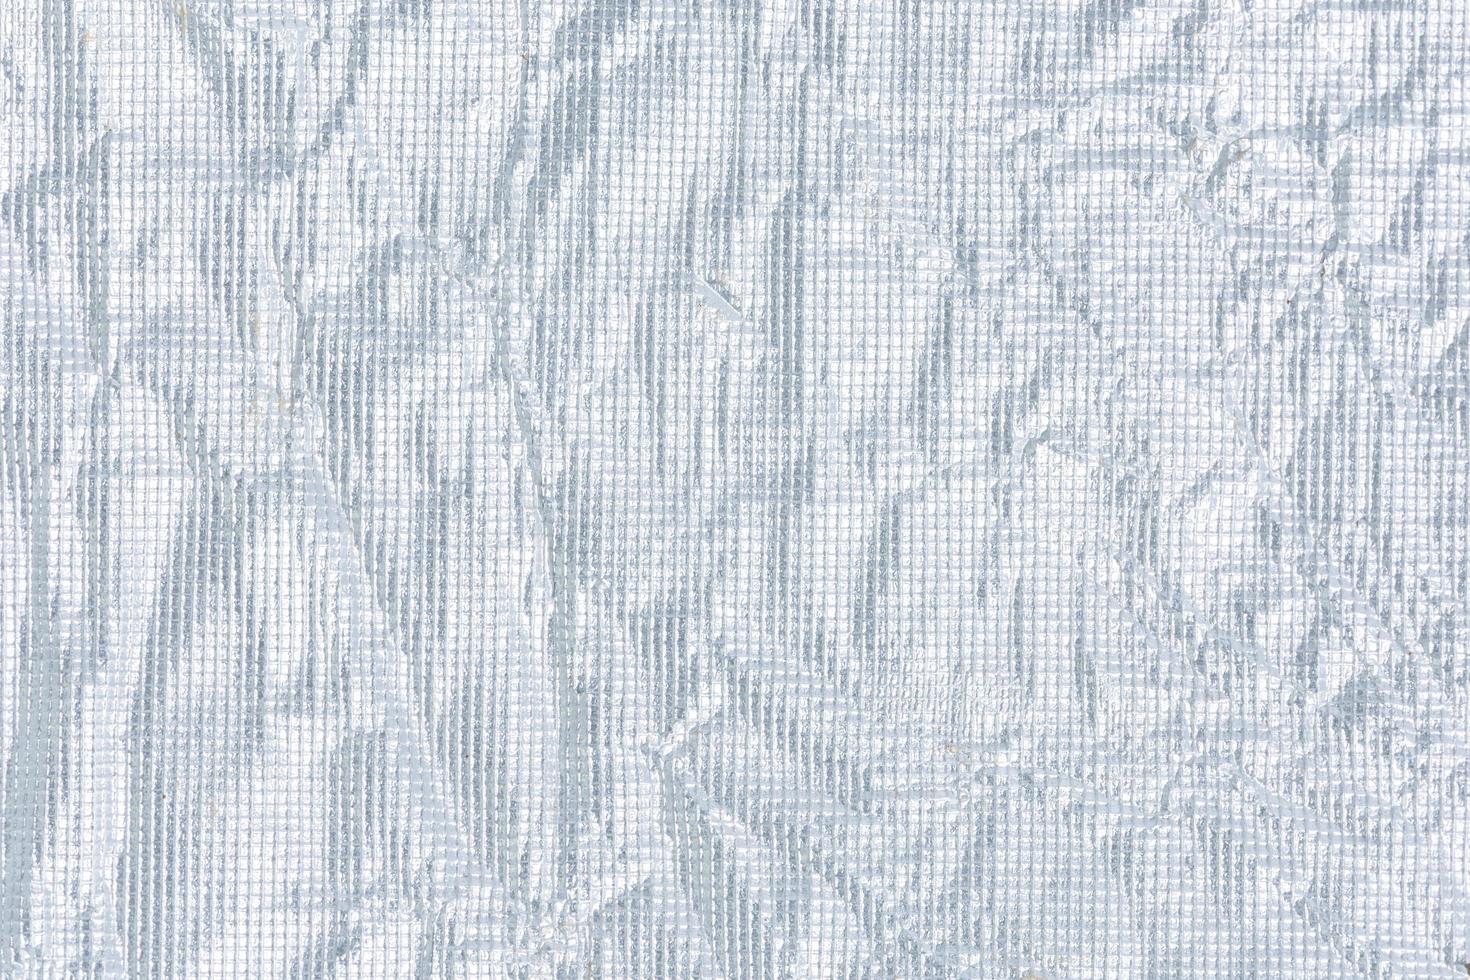 Wrinkled silver paper background photo